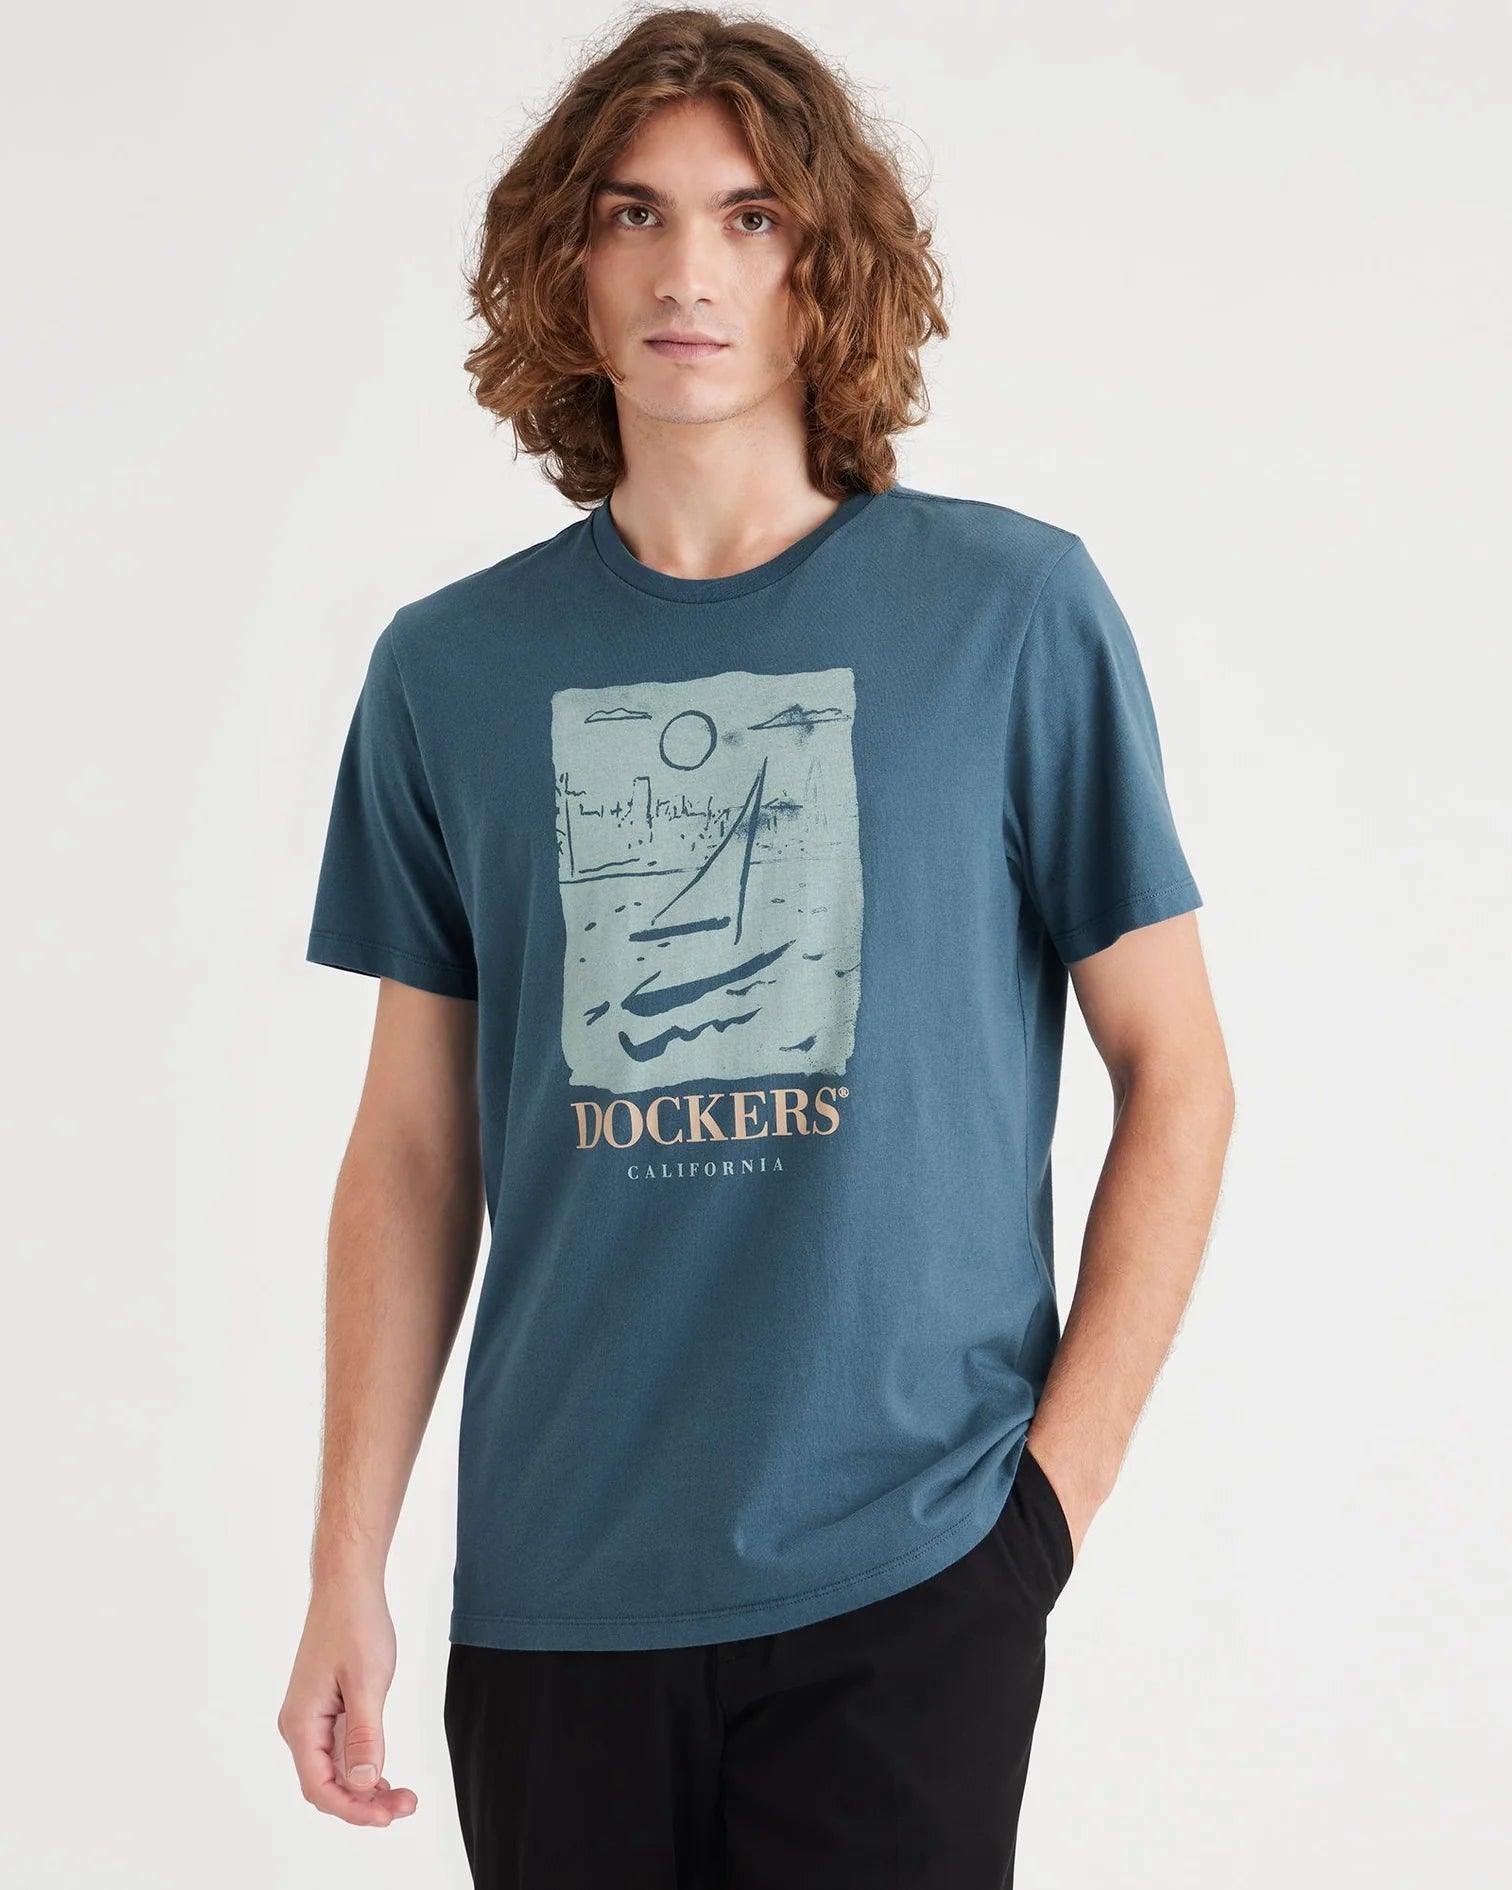 Camiseta Dockers® City By The Bay Indian Teal Blue - ECRU